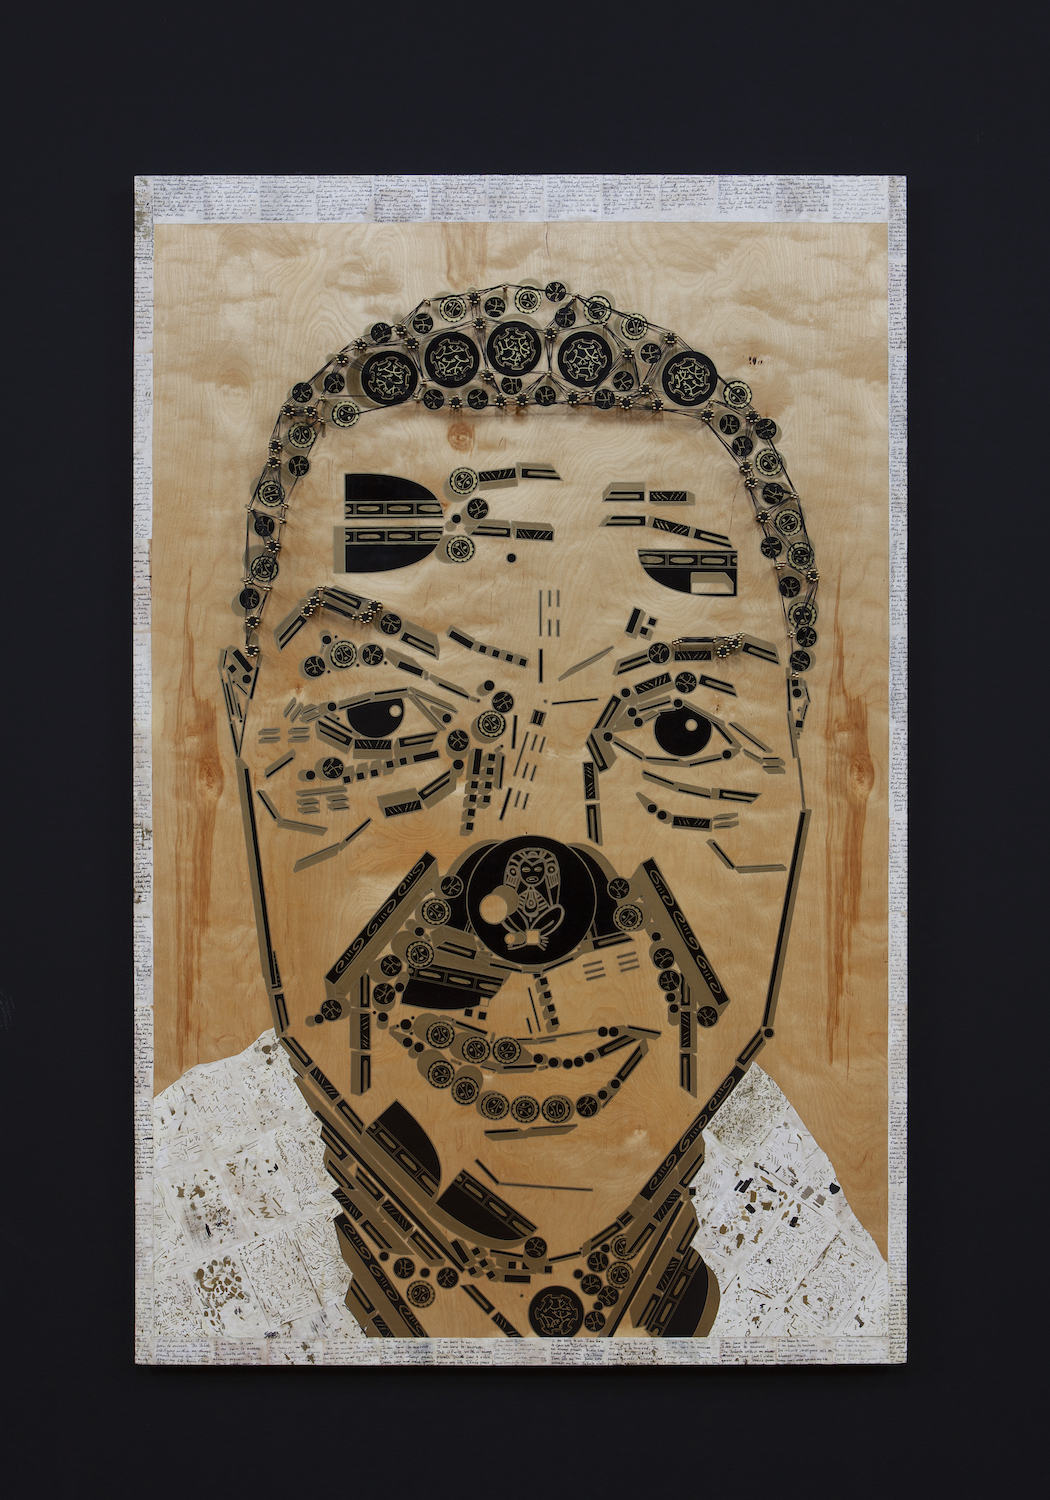 Glendalys Medina, *Ms. Puerto Rico*, 2019. Paper, marker, nails, and thread, 63 x 40.5 inches